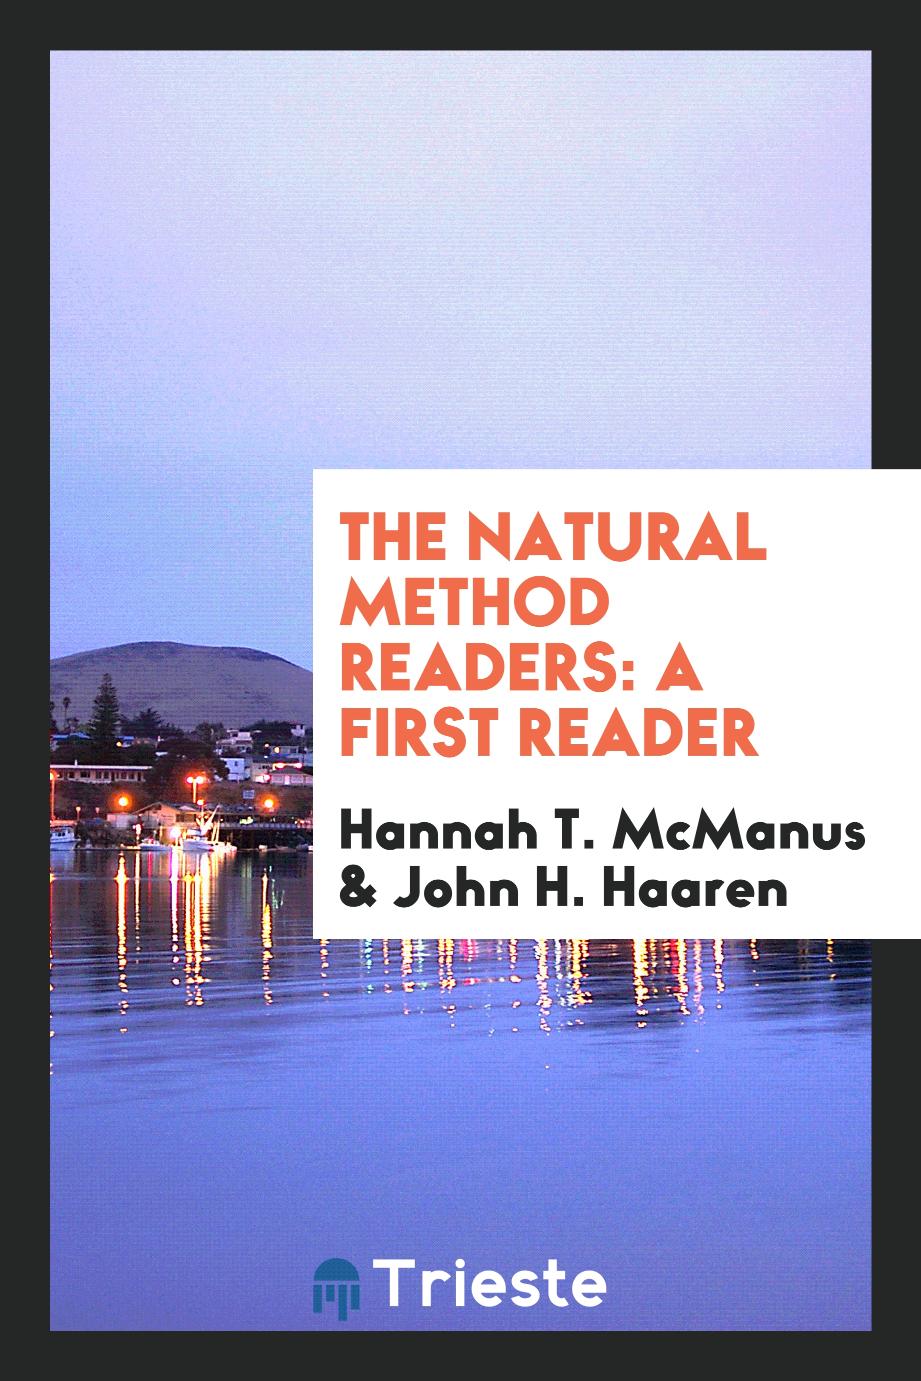 The Natural Method Readers: A First Reader